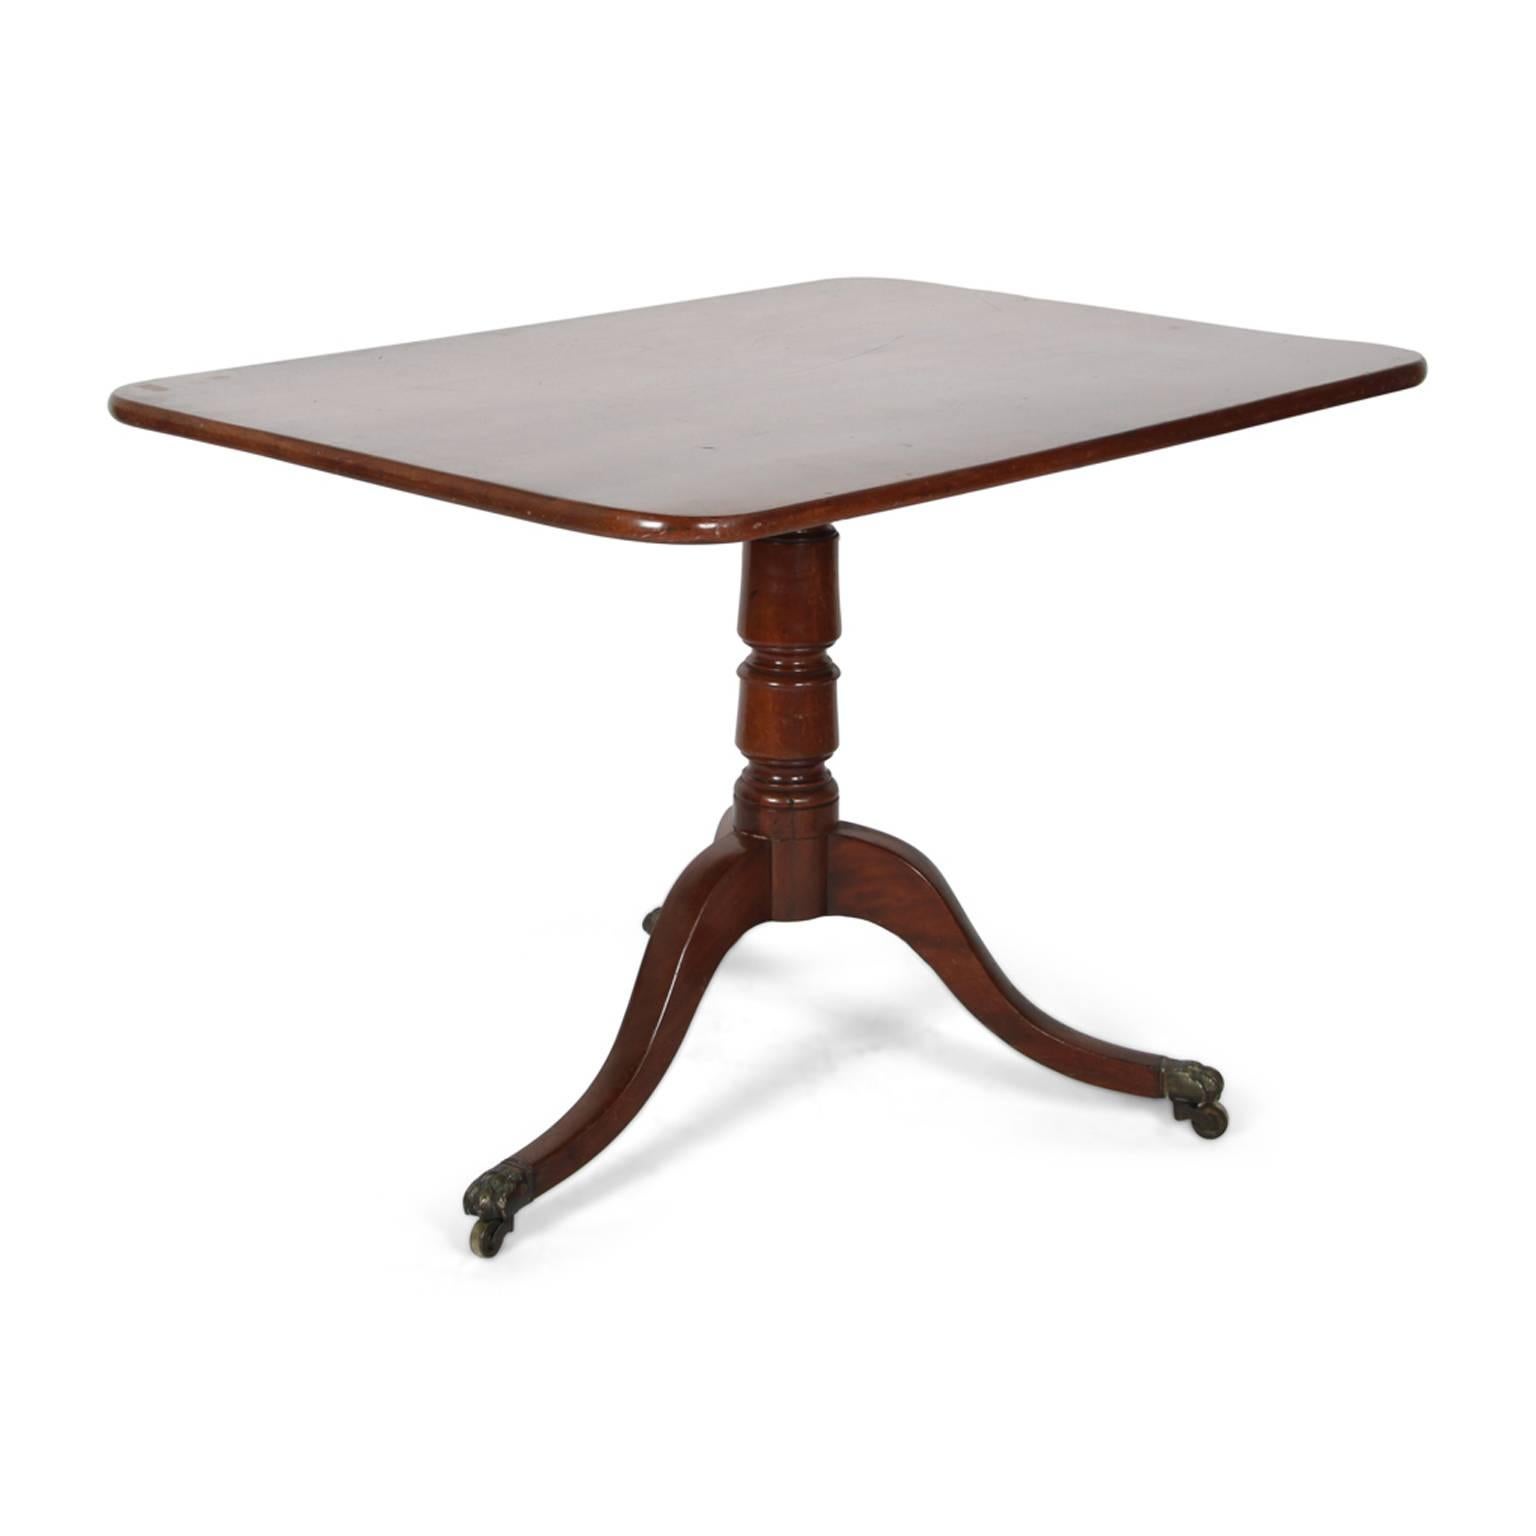 An English Georgian ’tilt-top’ breakfast or side table, the top a single board of mahogany, with a pedestal base on three legs, with brass castors, circa 1825.



        